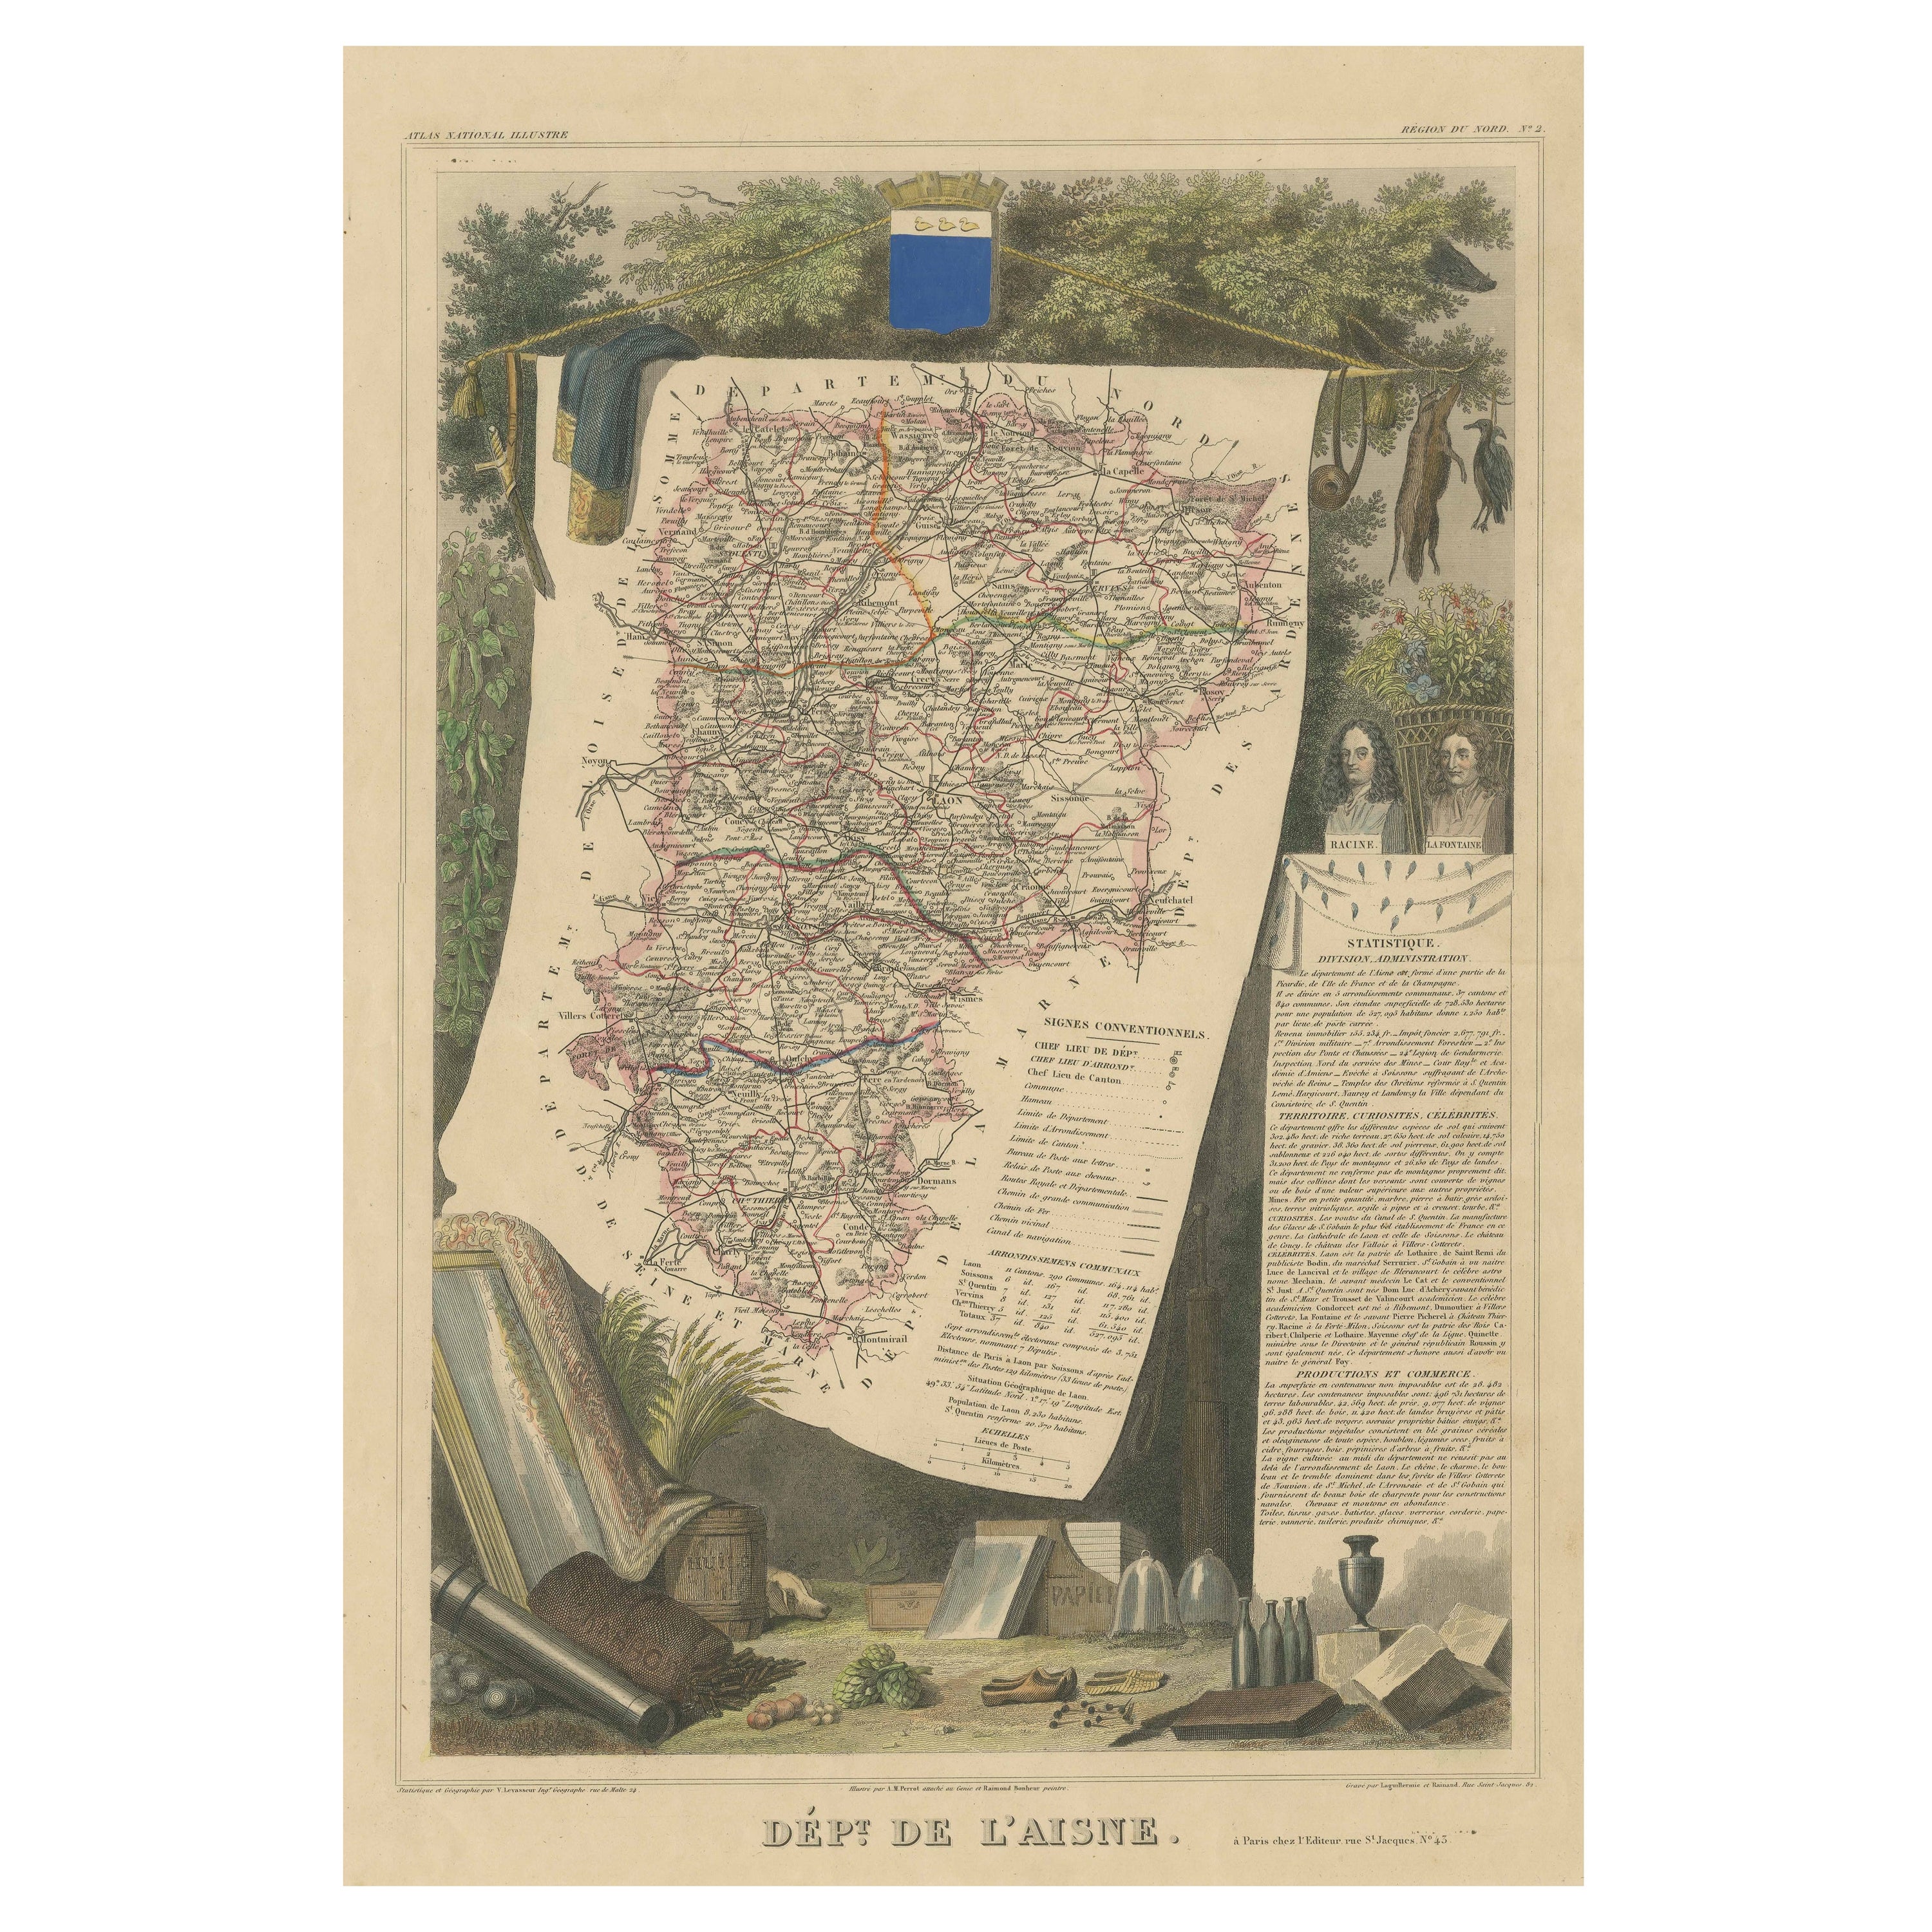 Hand Colored Antique Map of the Department of L'aisne, France